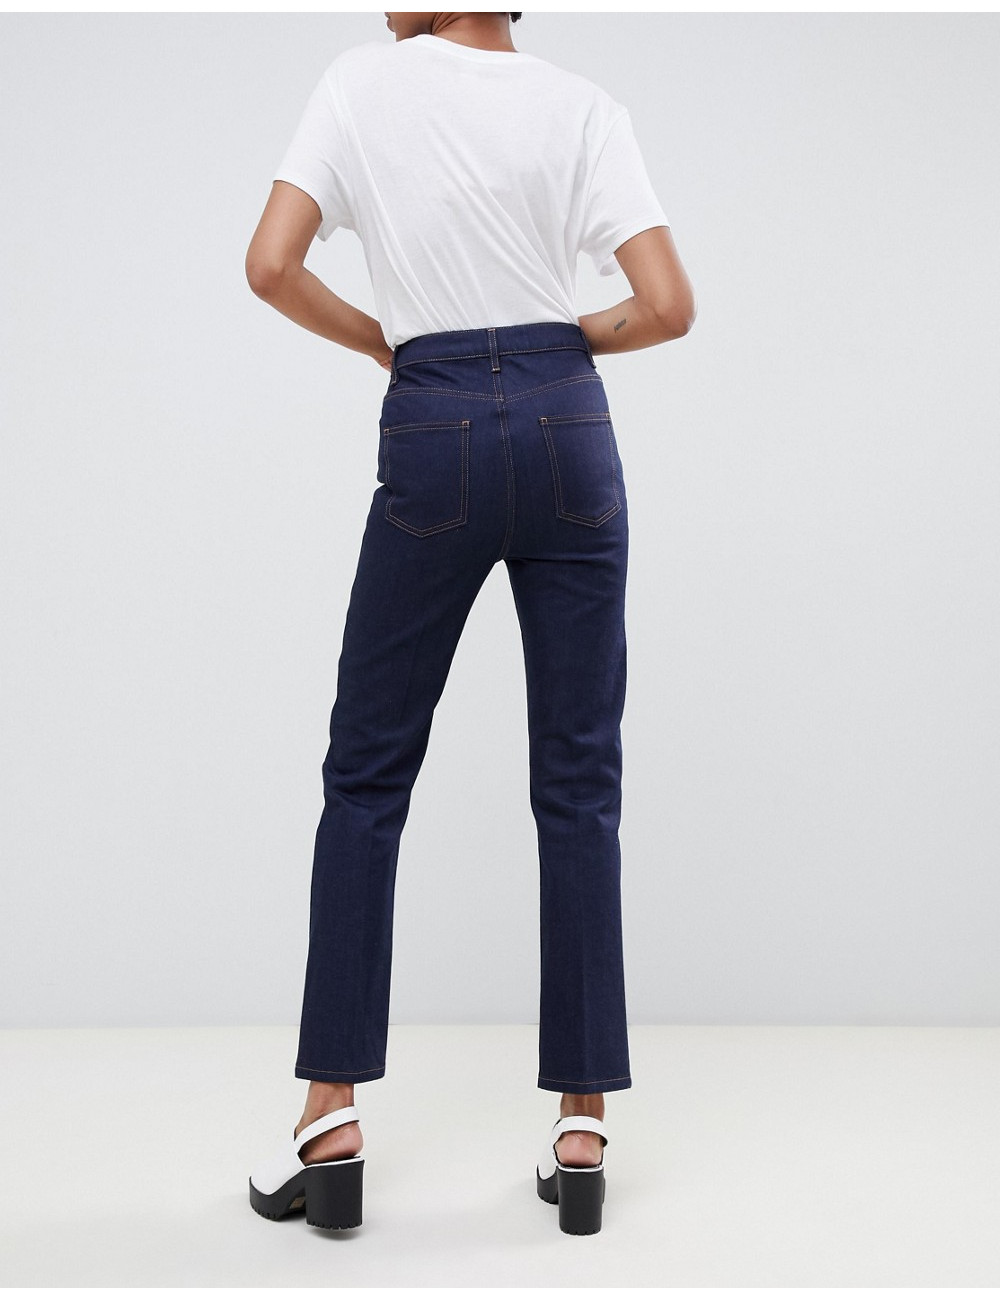 ASOS DESIGN Tall Recycled...